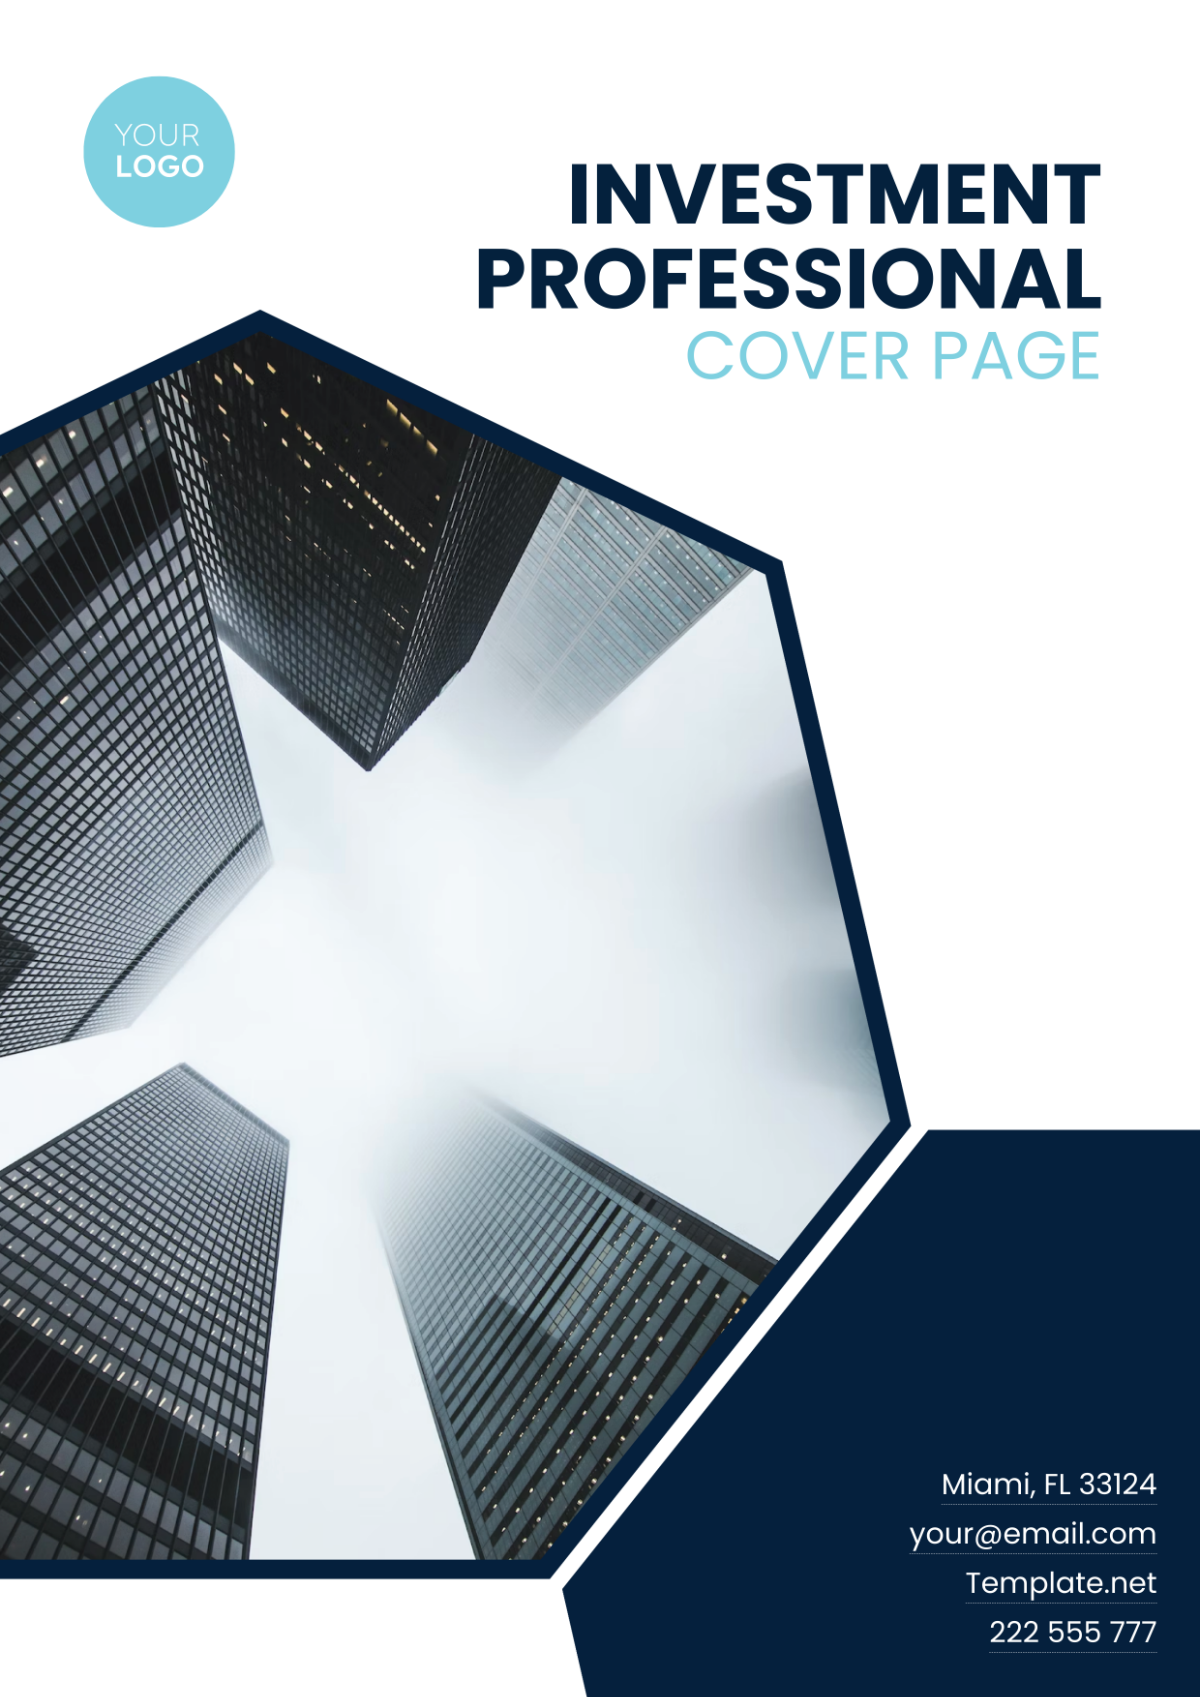 Free Investment Professional Cover Page Template